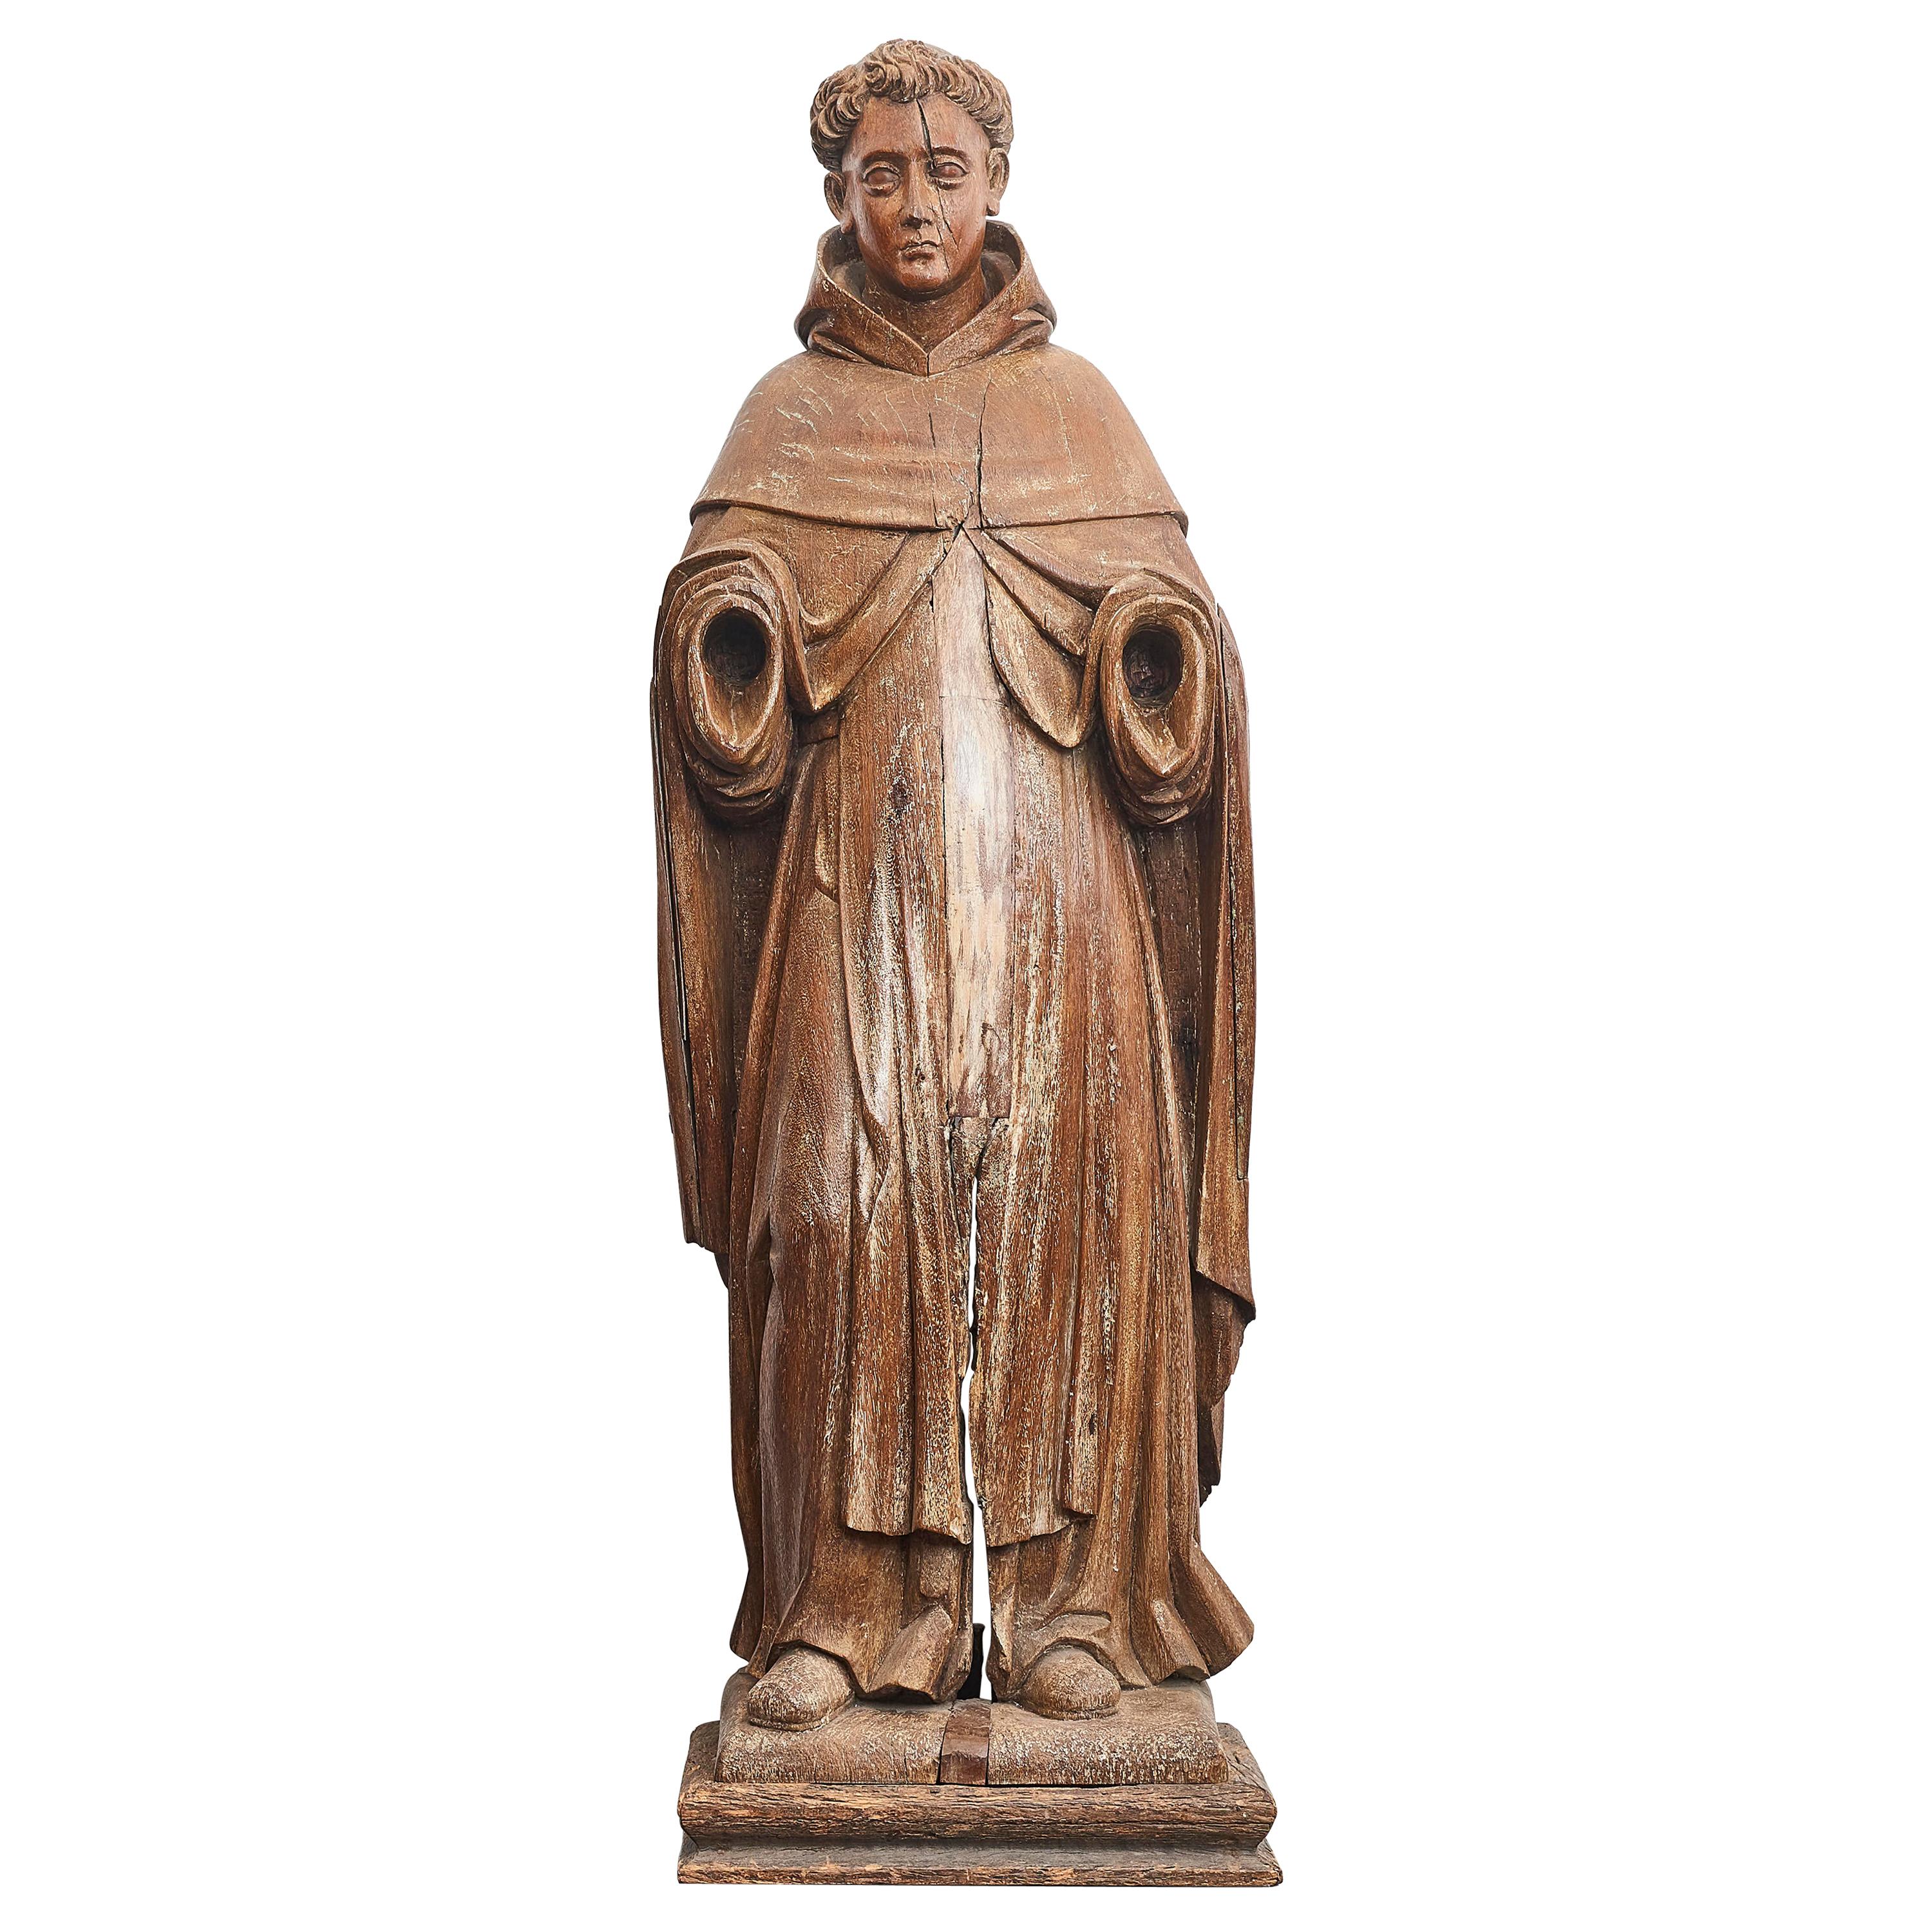 Large 18th Century Wood Carved Statue of "Saint Francis of Assisi"